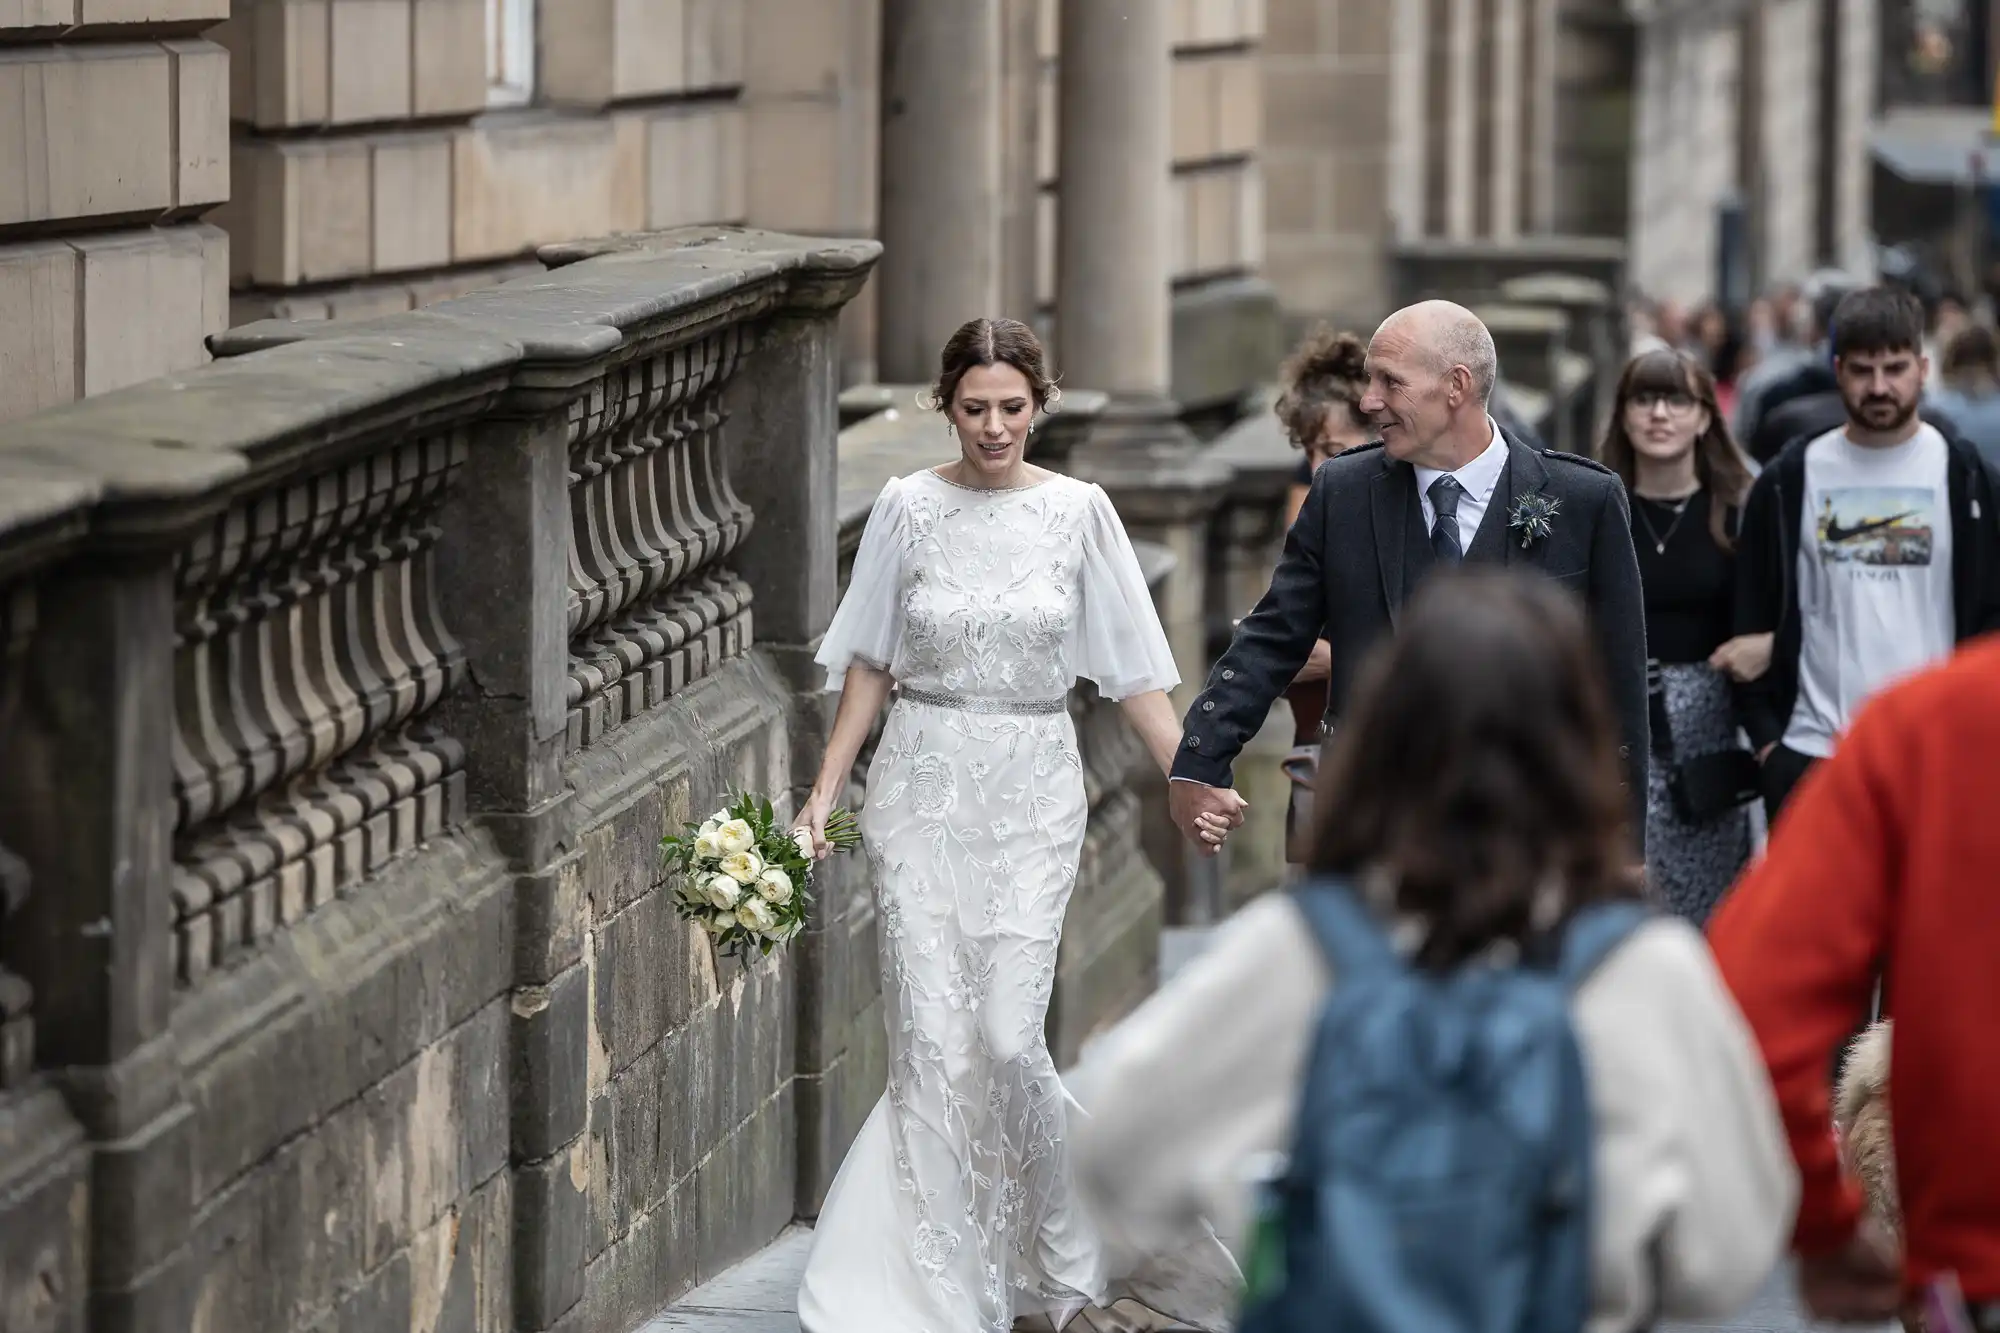 A bride in a white gown holding a bouquet walks beside a man in a suit, with people walking nearby on a stone-paved street near ornate stone buildings.